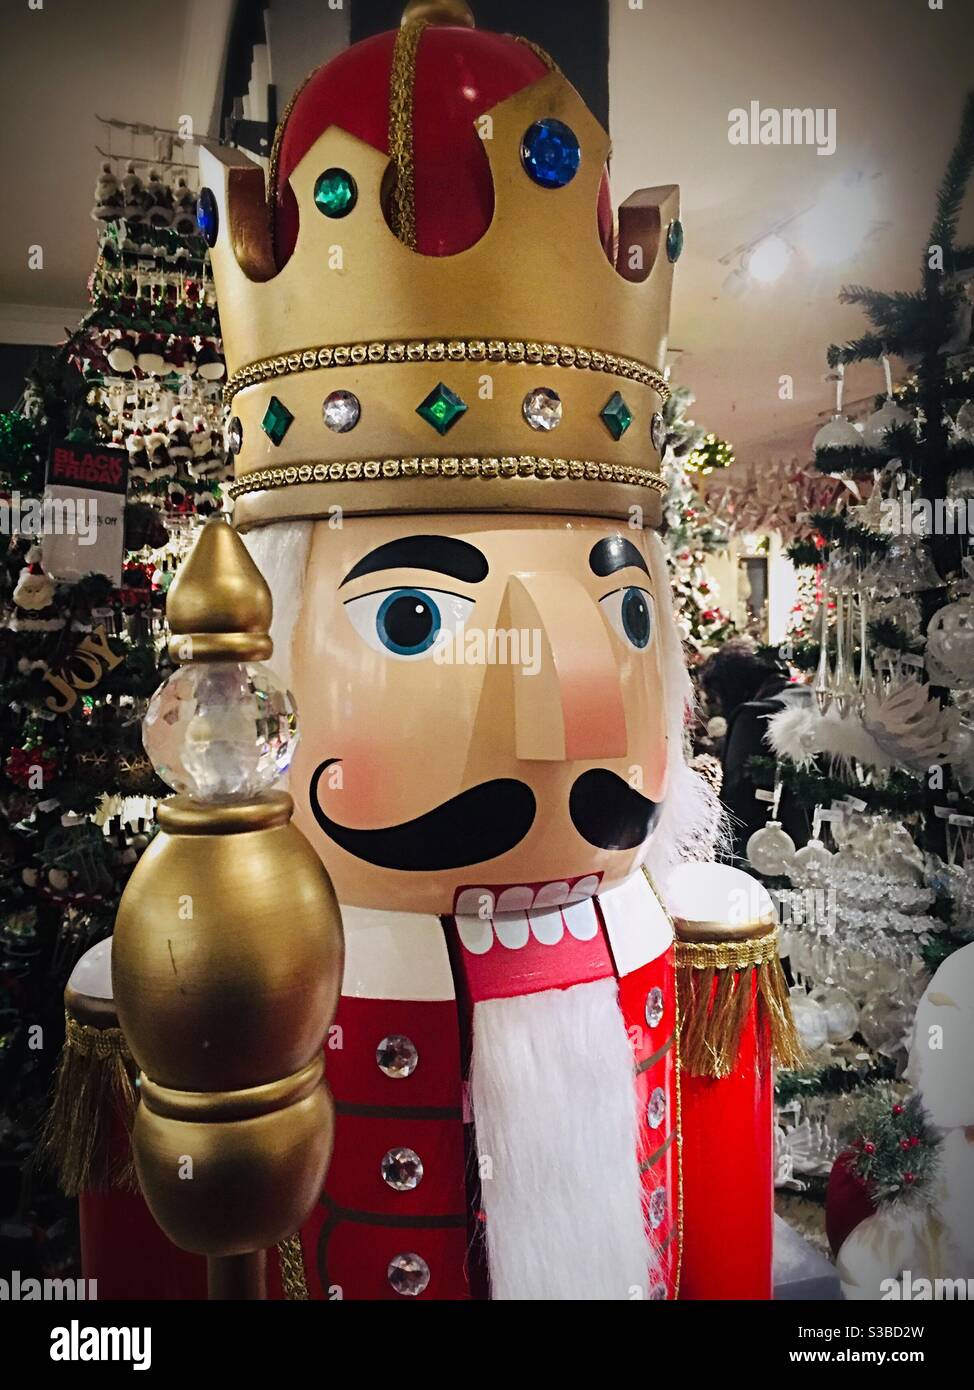 Toy soldier nutcracker ornament in the holiday Lane at Macy’s flag ship store in New York City, USA Stock Photo